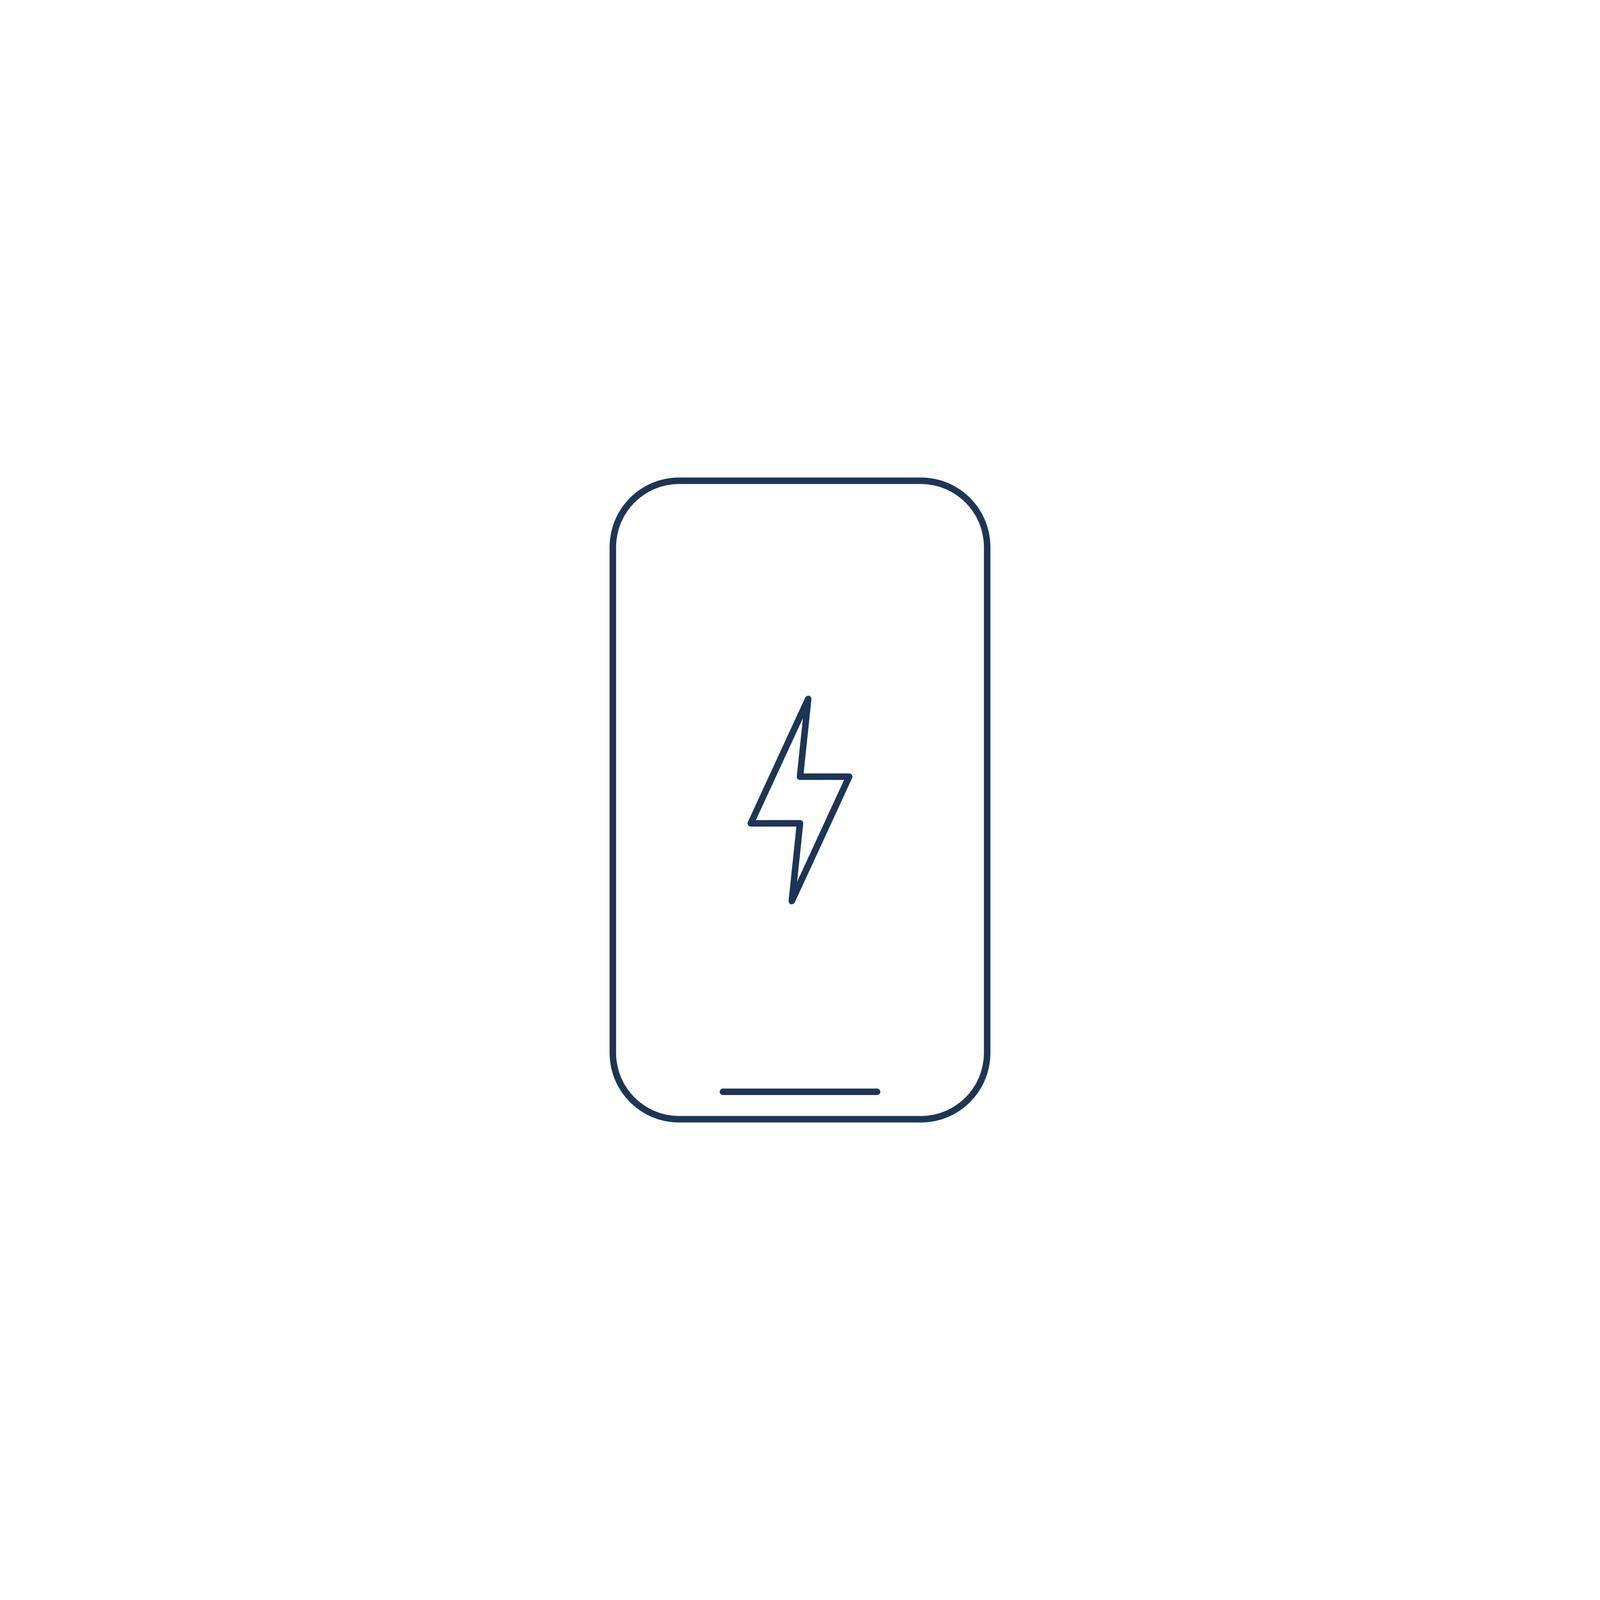 Smartphone charging battery outline icon. Stock vector illustration isolated